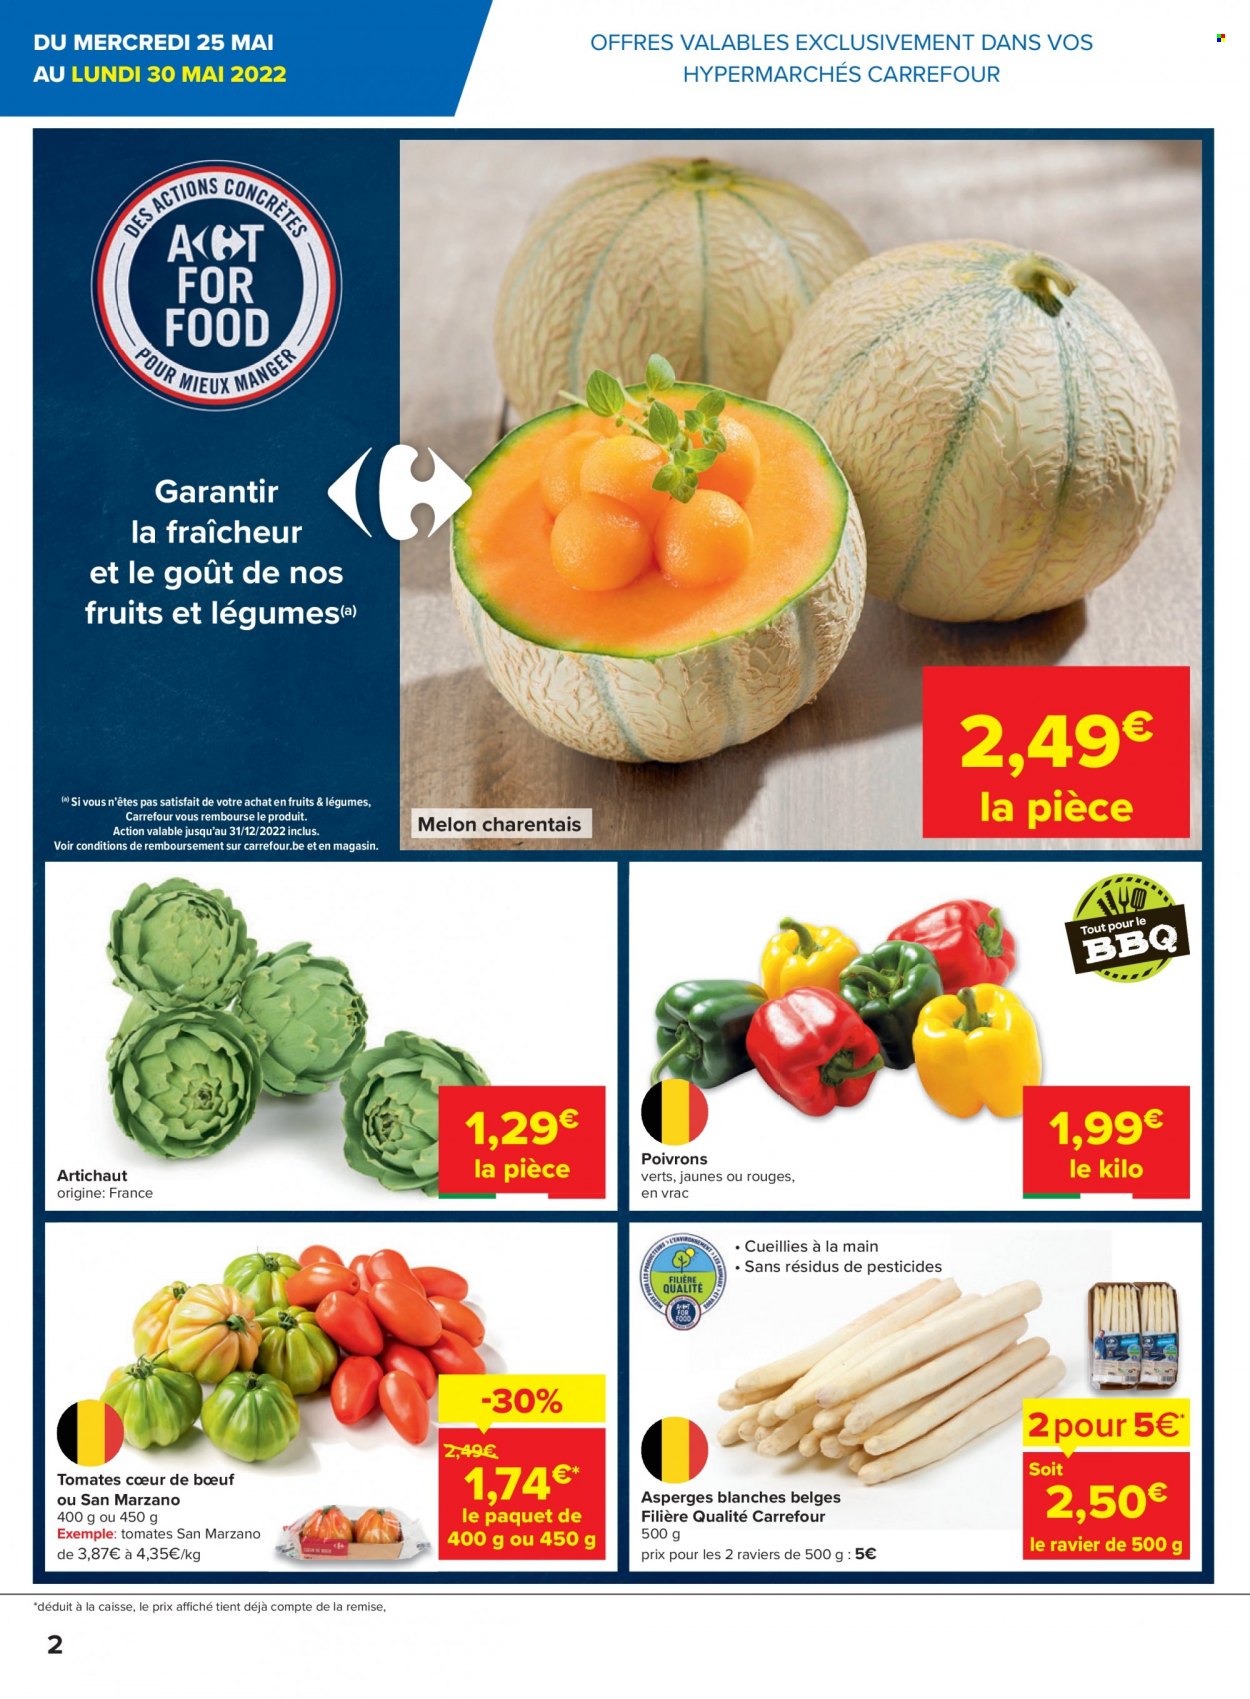 Catalogue Carrefour hypermarkt - 25.5.2022 - 31.5.2022. Page 2.